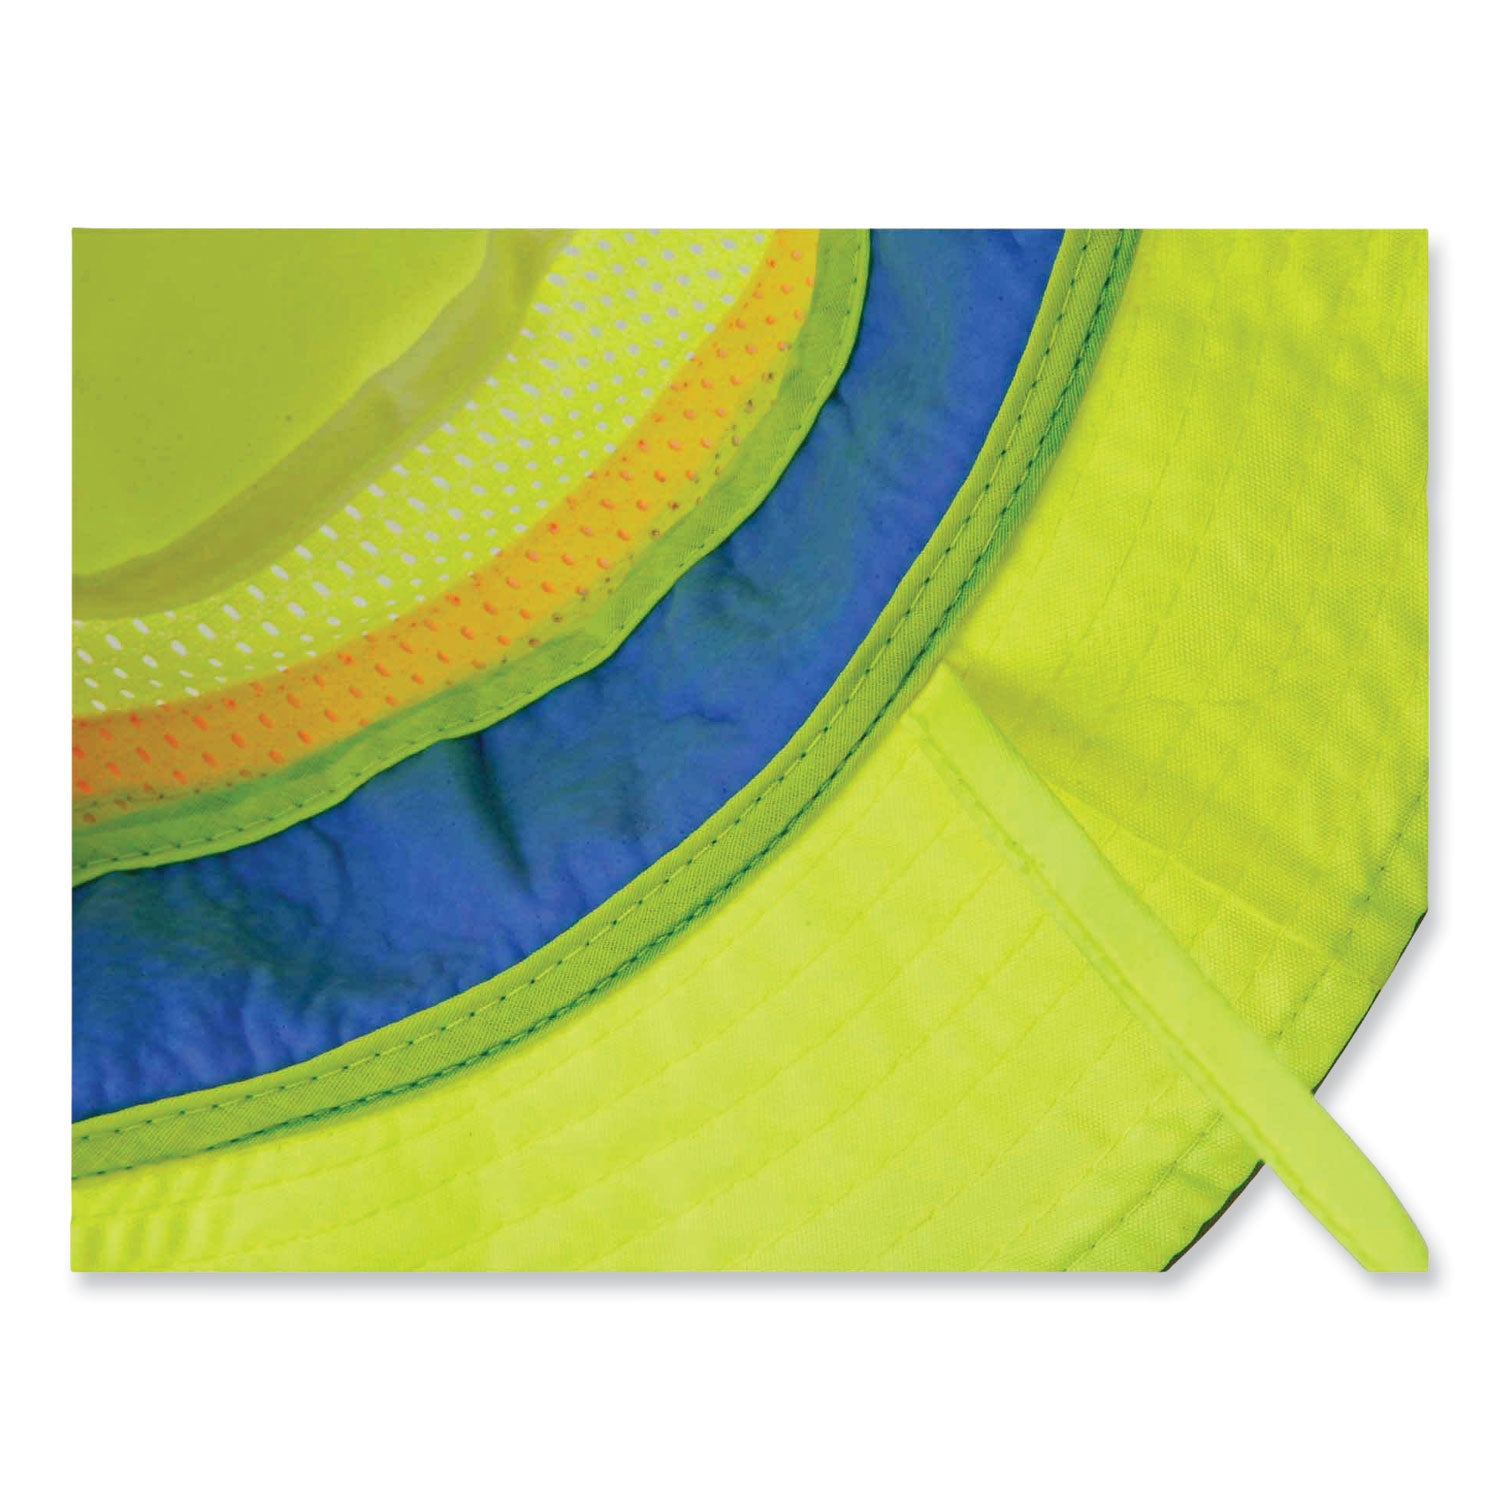 chill-its-8935ct-hi-vis-pva-ranger-sun-hat-small-medium-lime-ships-in-1-3-business-days_ego12590 - 8